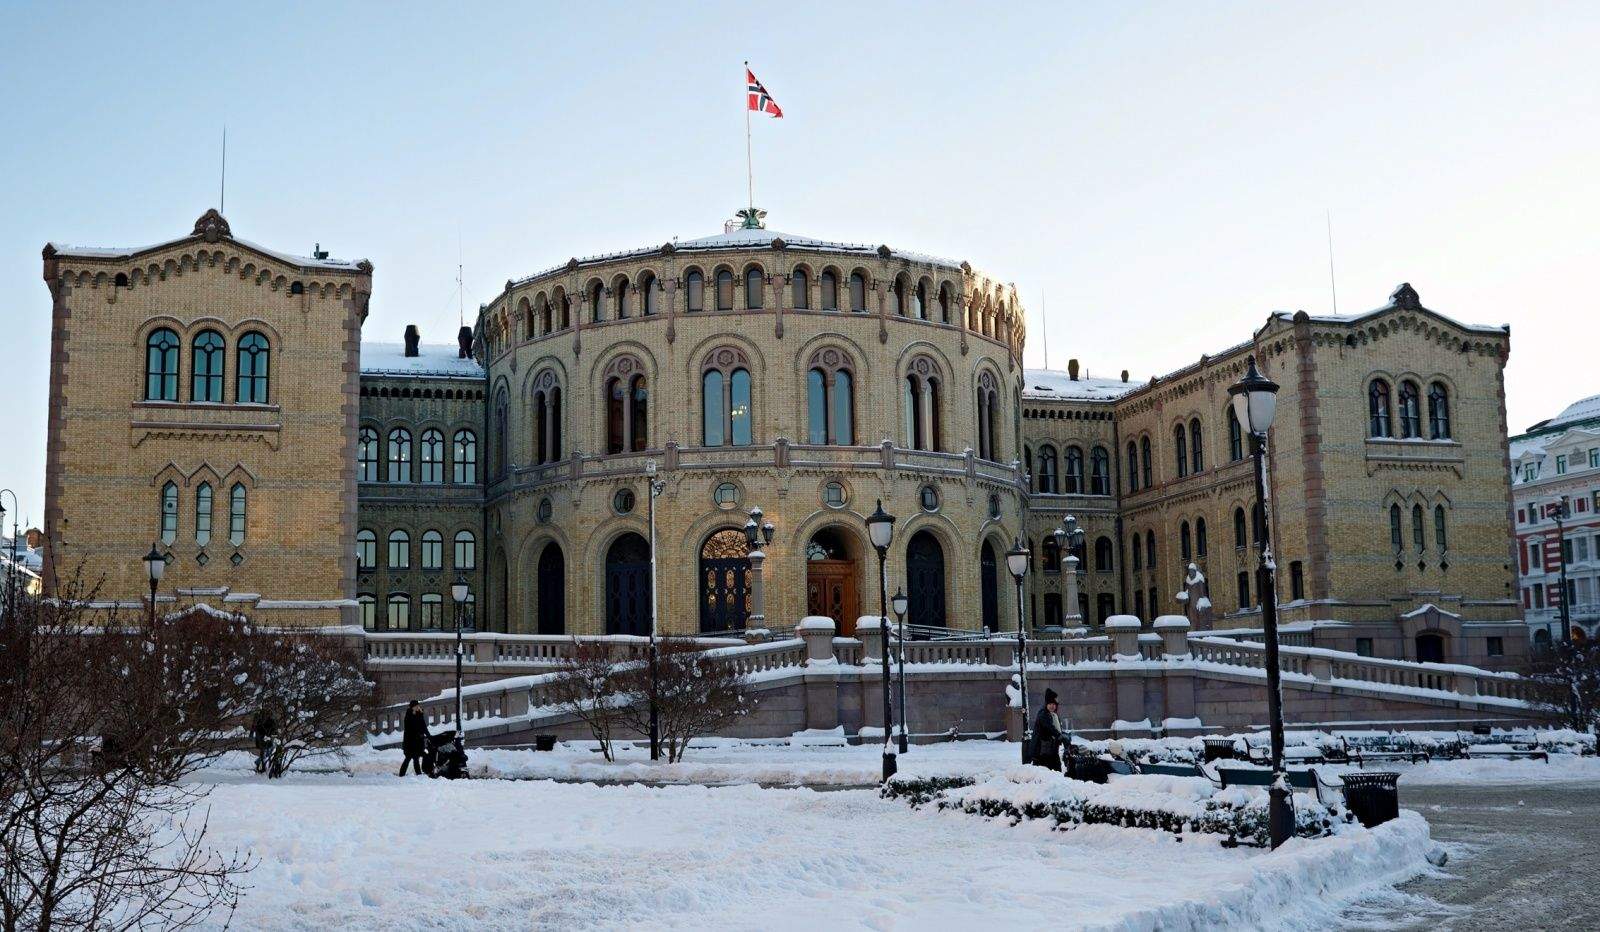 The Parliament of Norway in Oslo